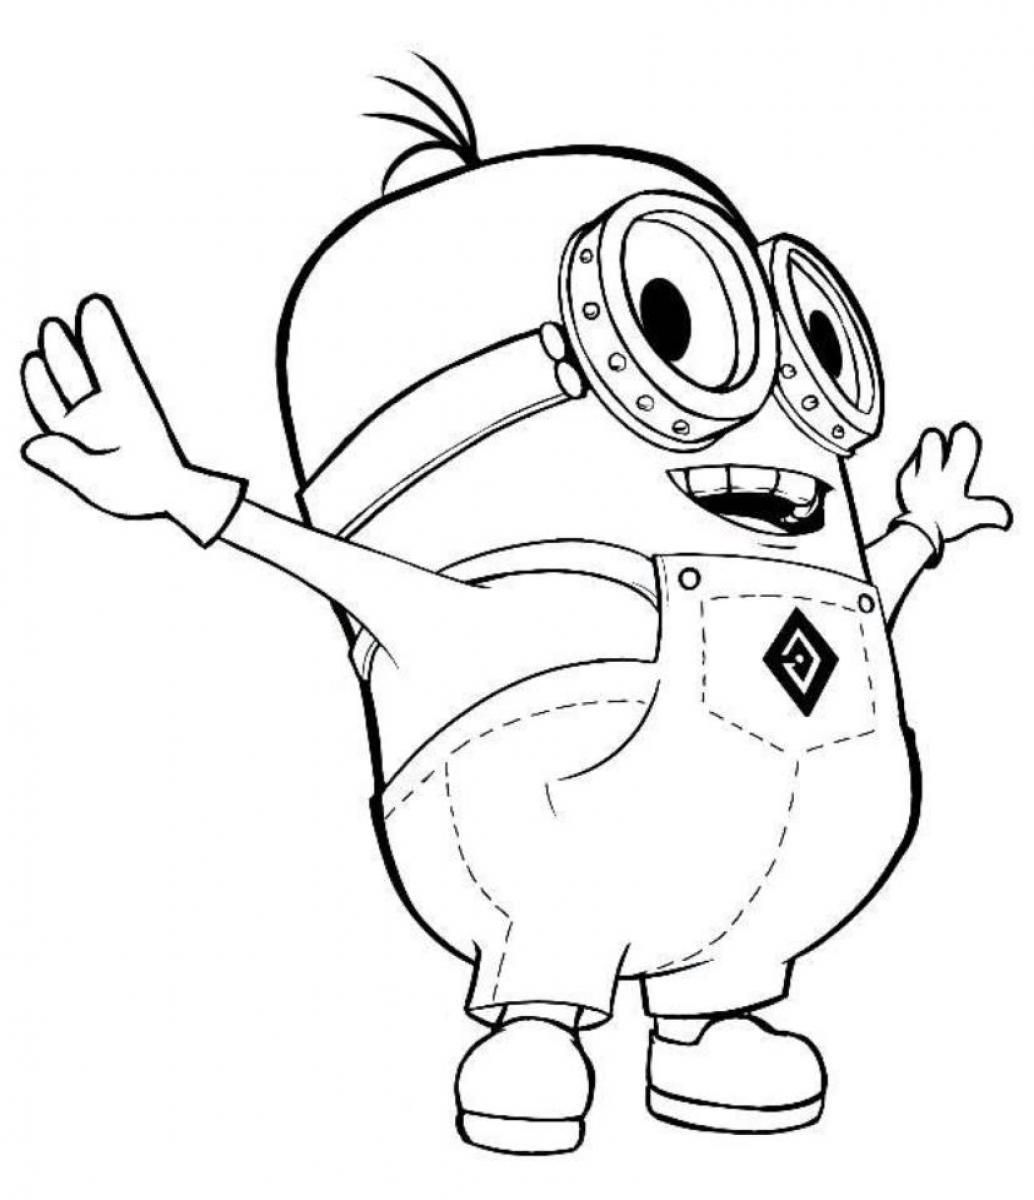  Minion From Despicable Coloring Pages - Bob Minion